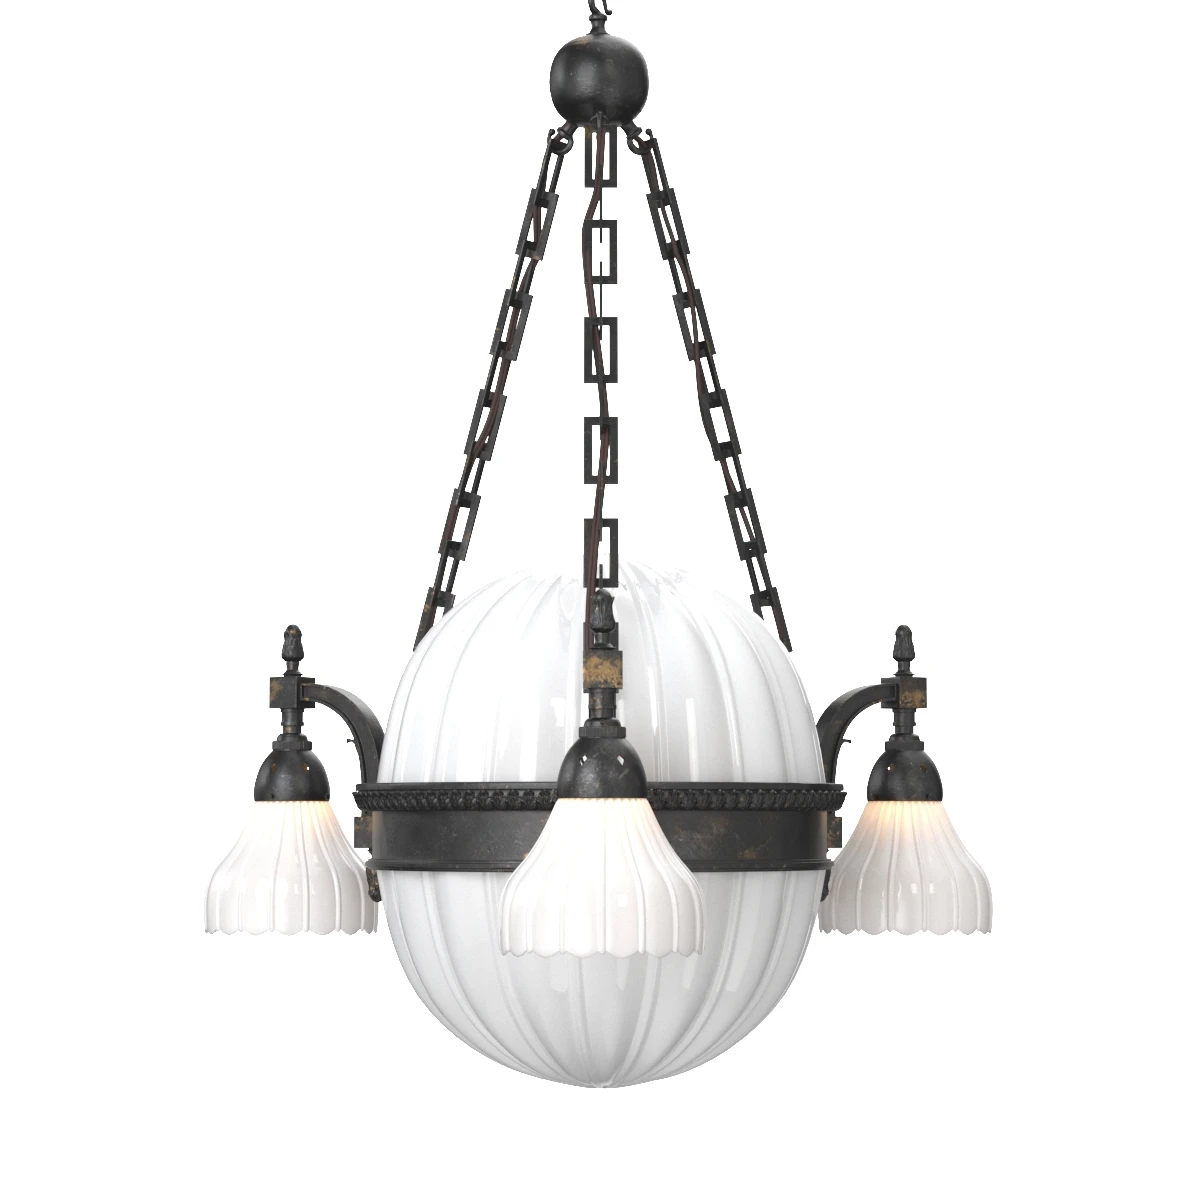 Moonstone Chandelier by Jefferson and Co England Circa 1910 3D Model_01